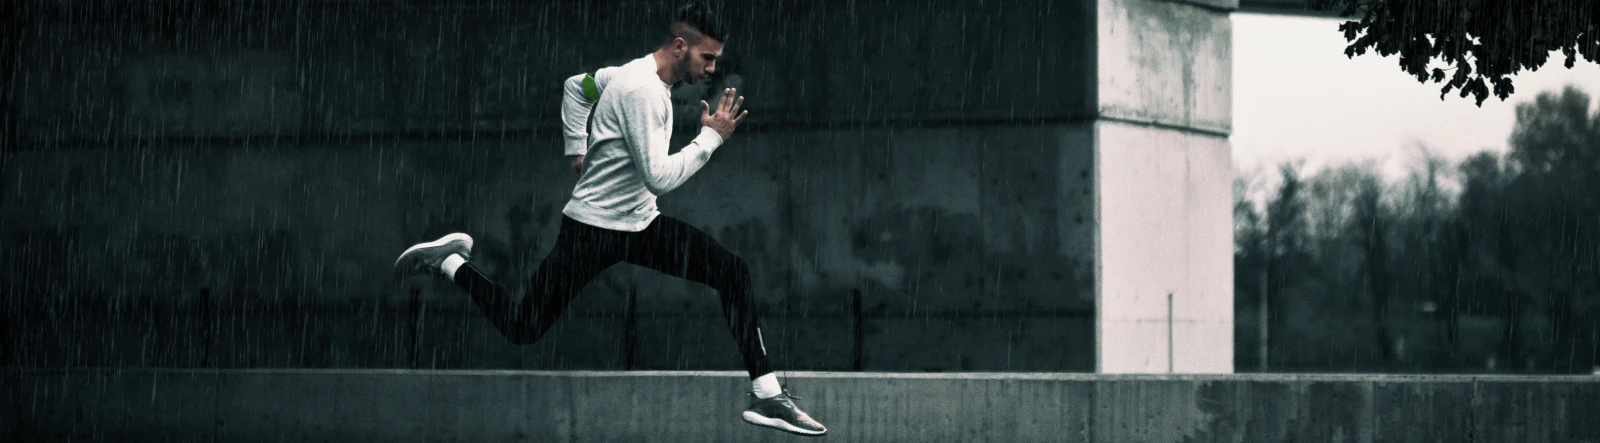 A man running quickly in the rain